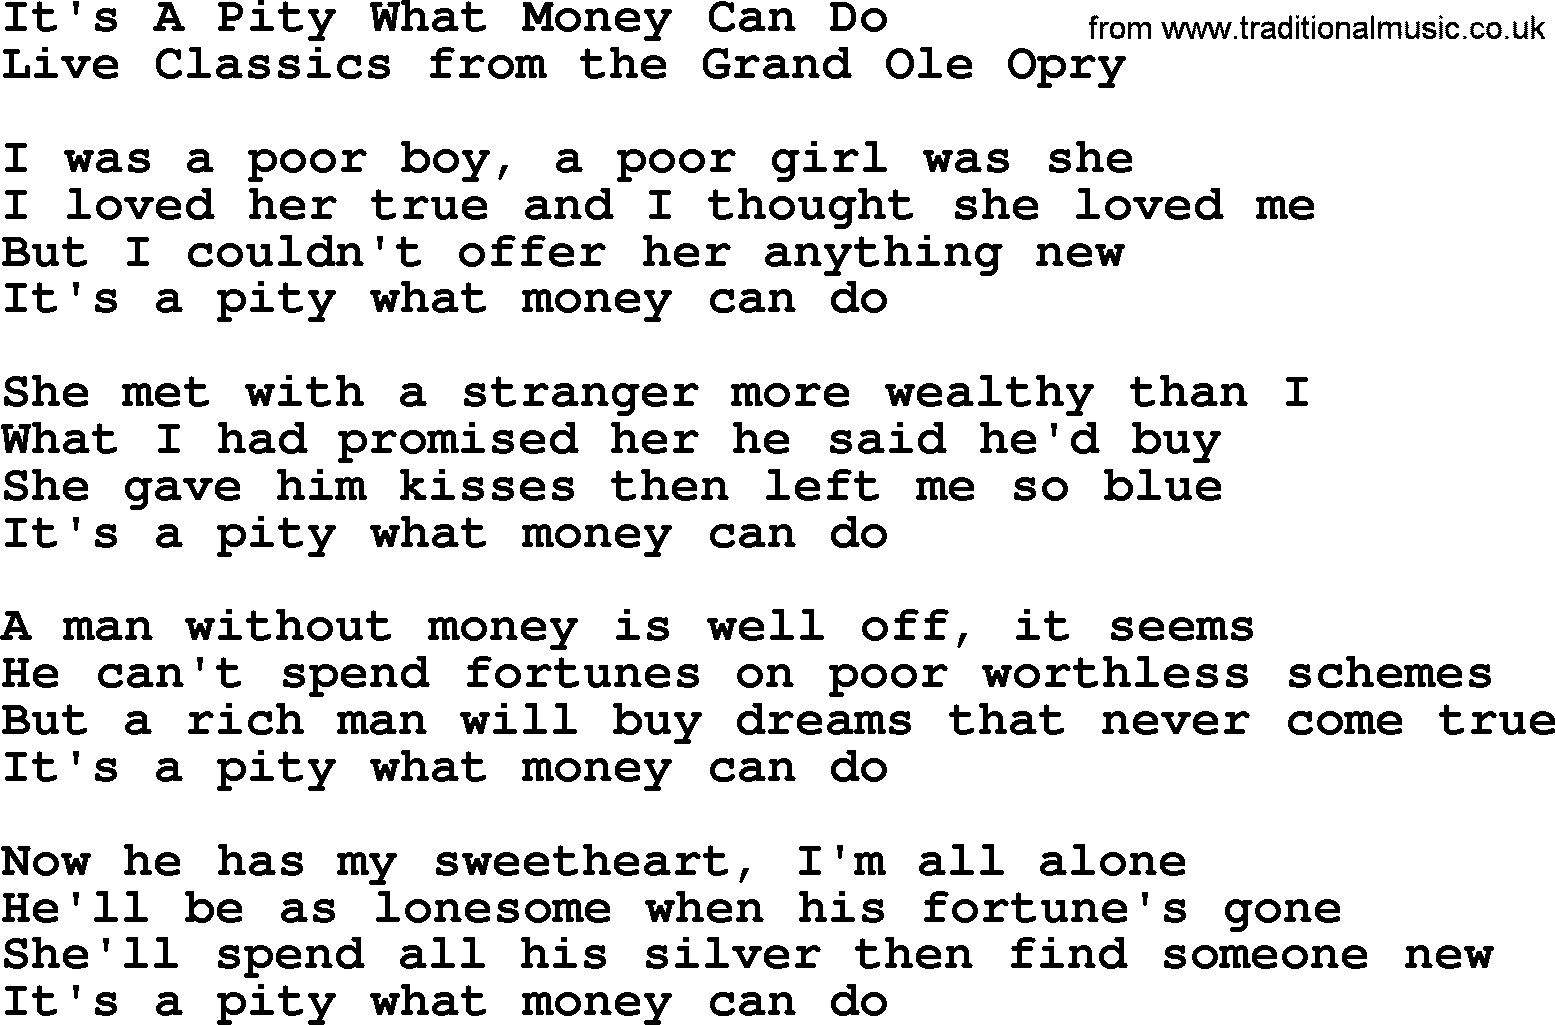 Marty Robbins song: It's A Pity What Money Can Do, lyrics